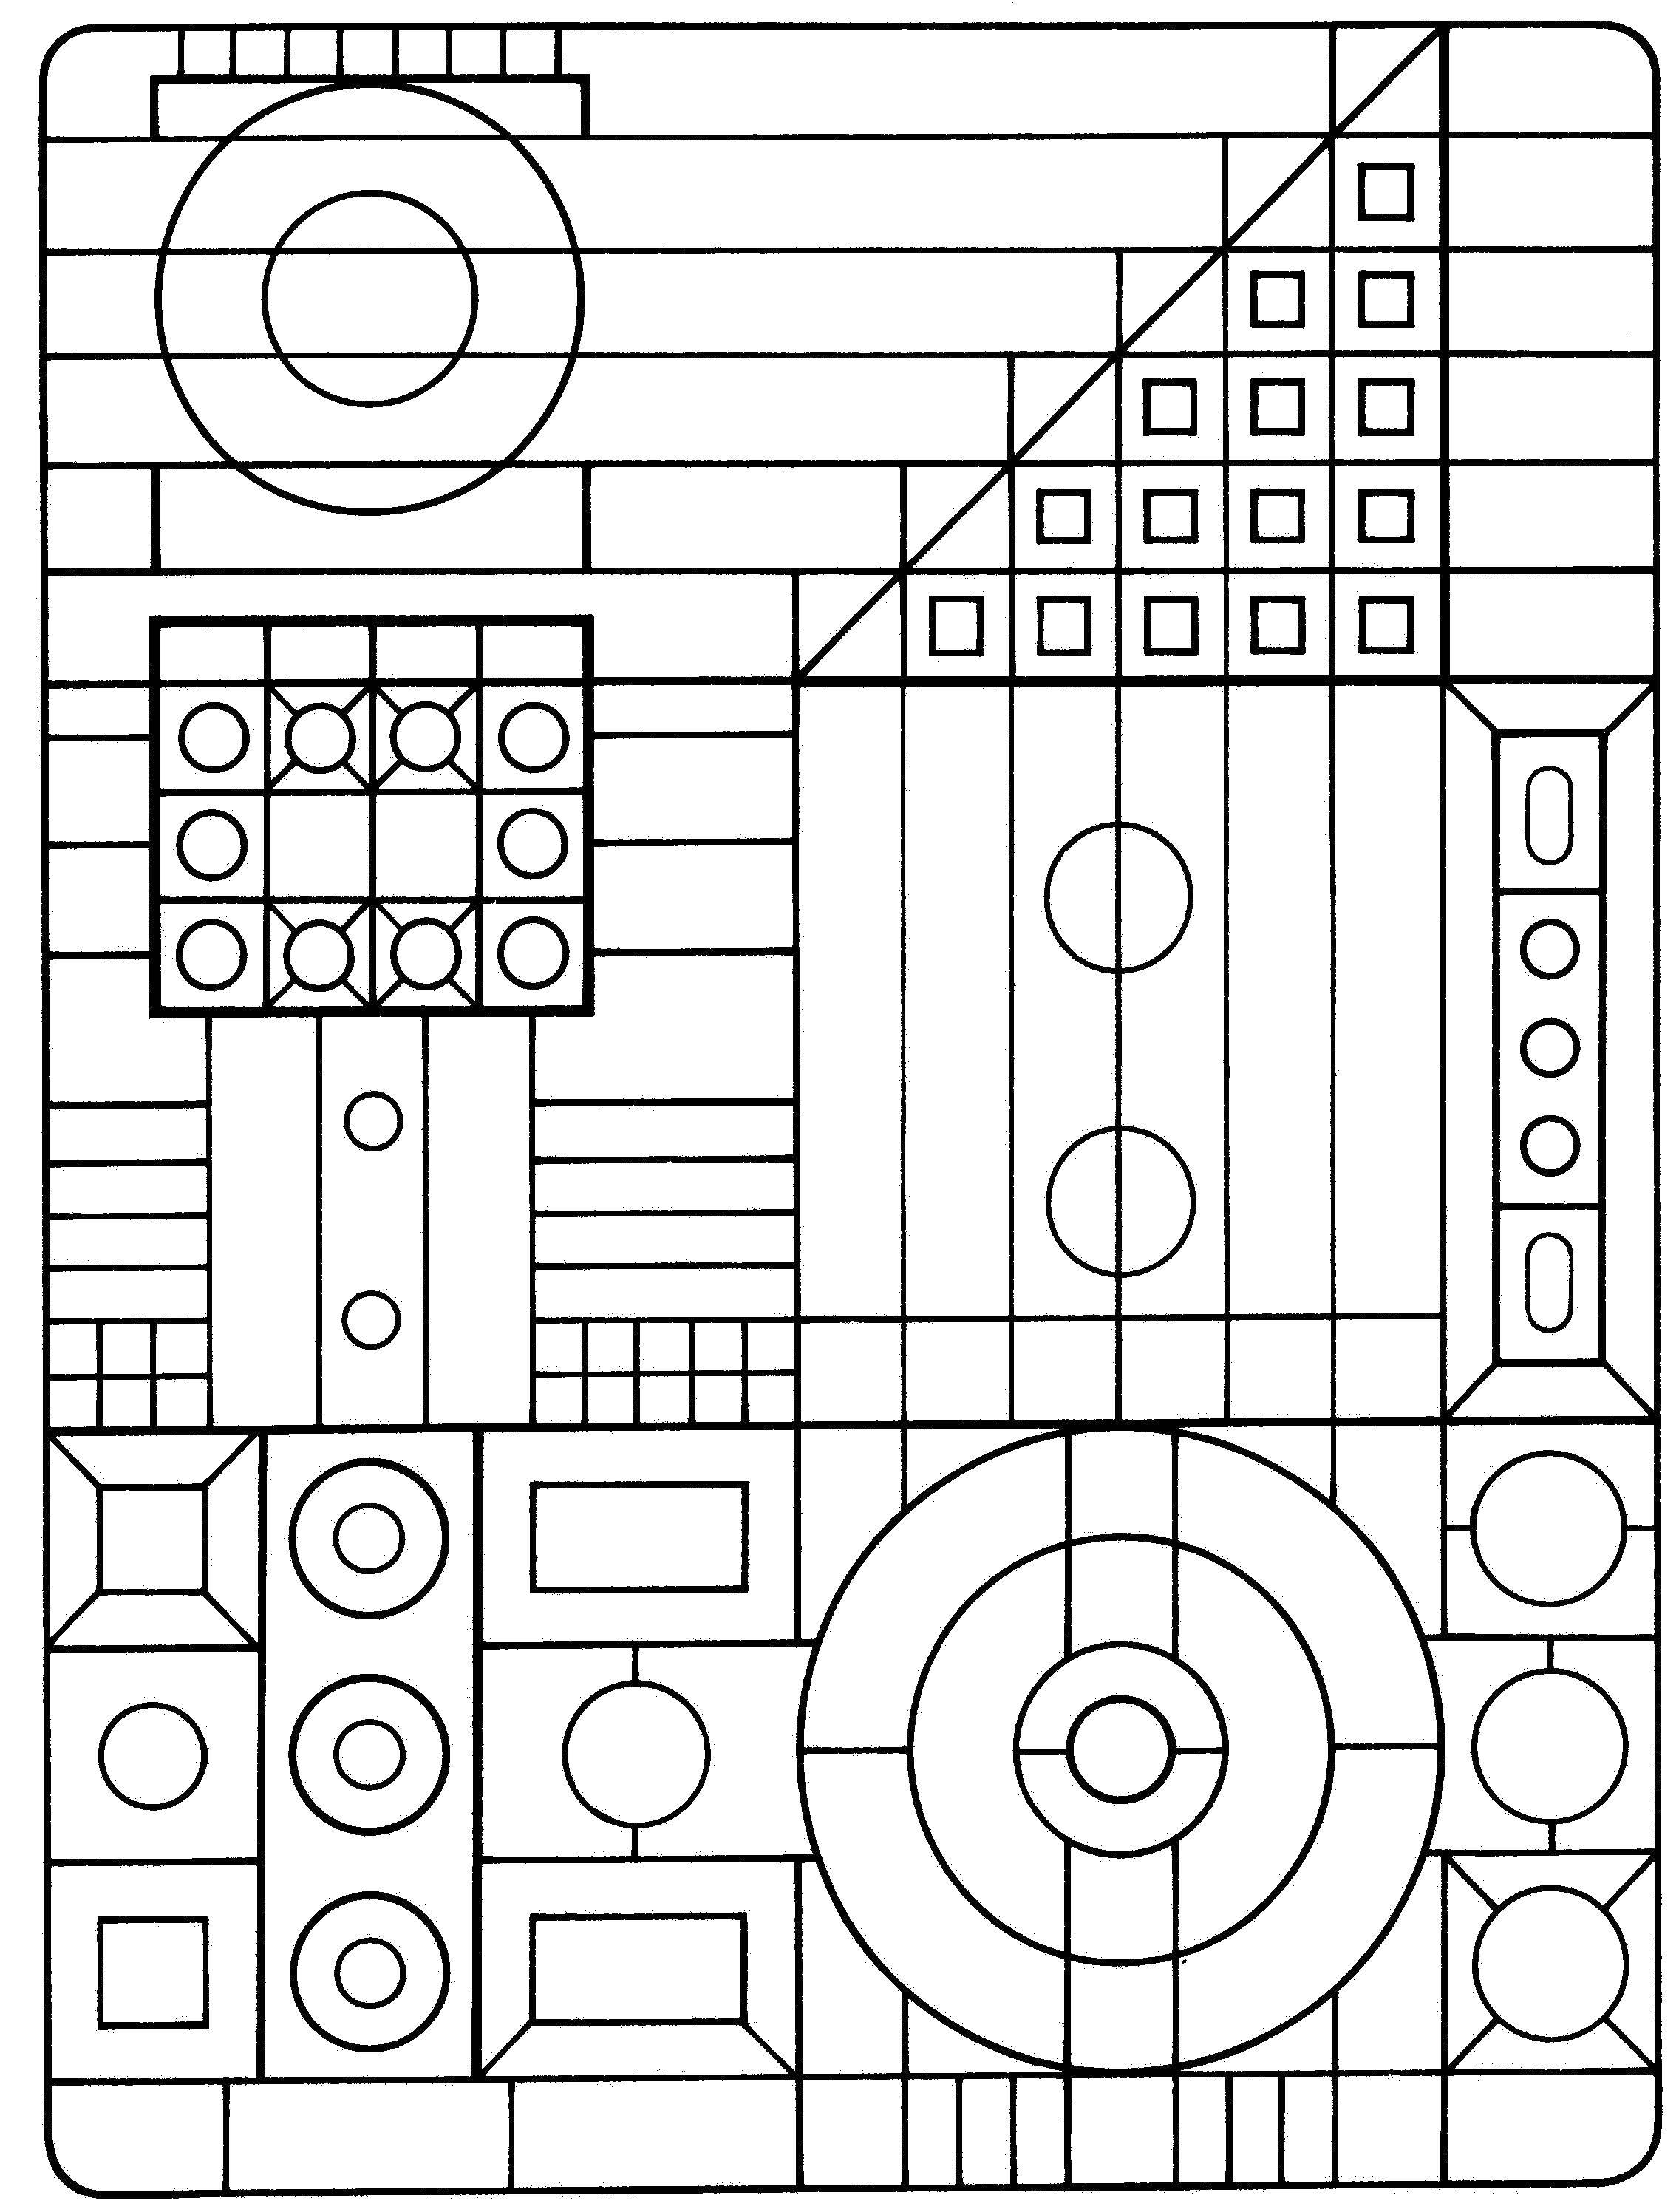 Coloring Figure. Category shapes. Tags:  patterns, shapes, stress relief.